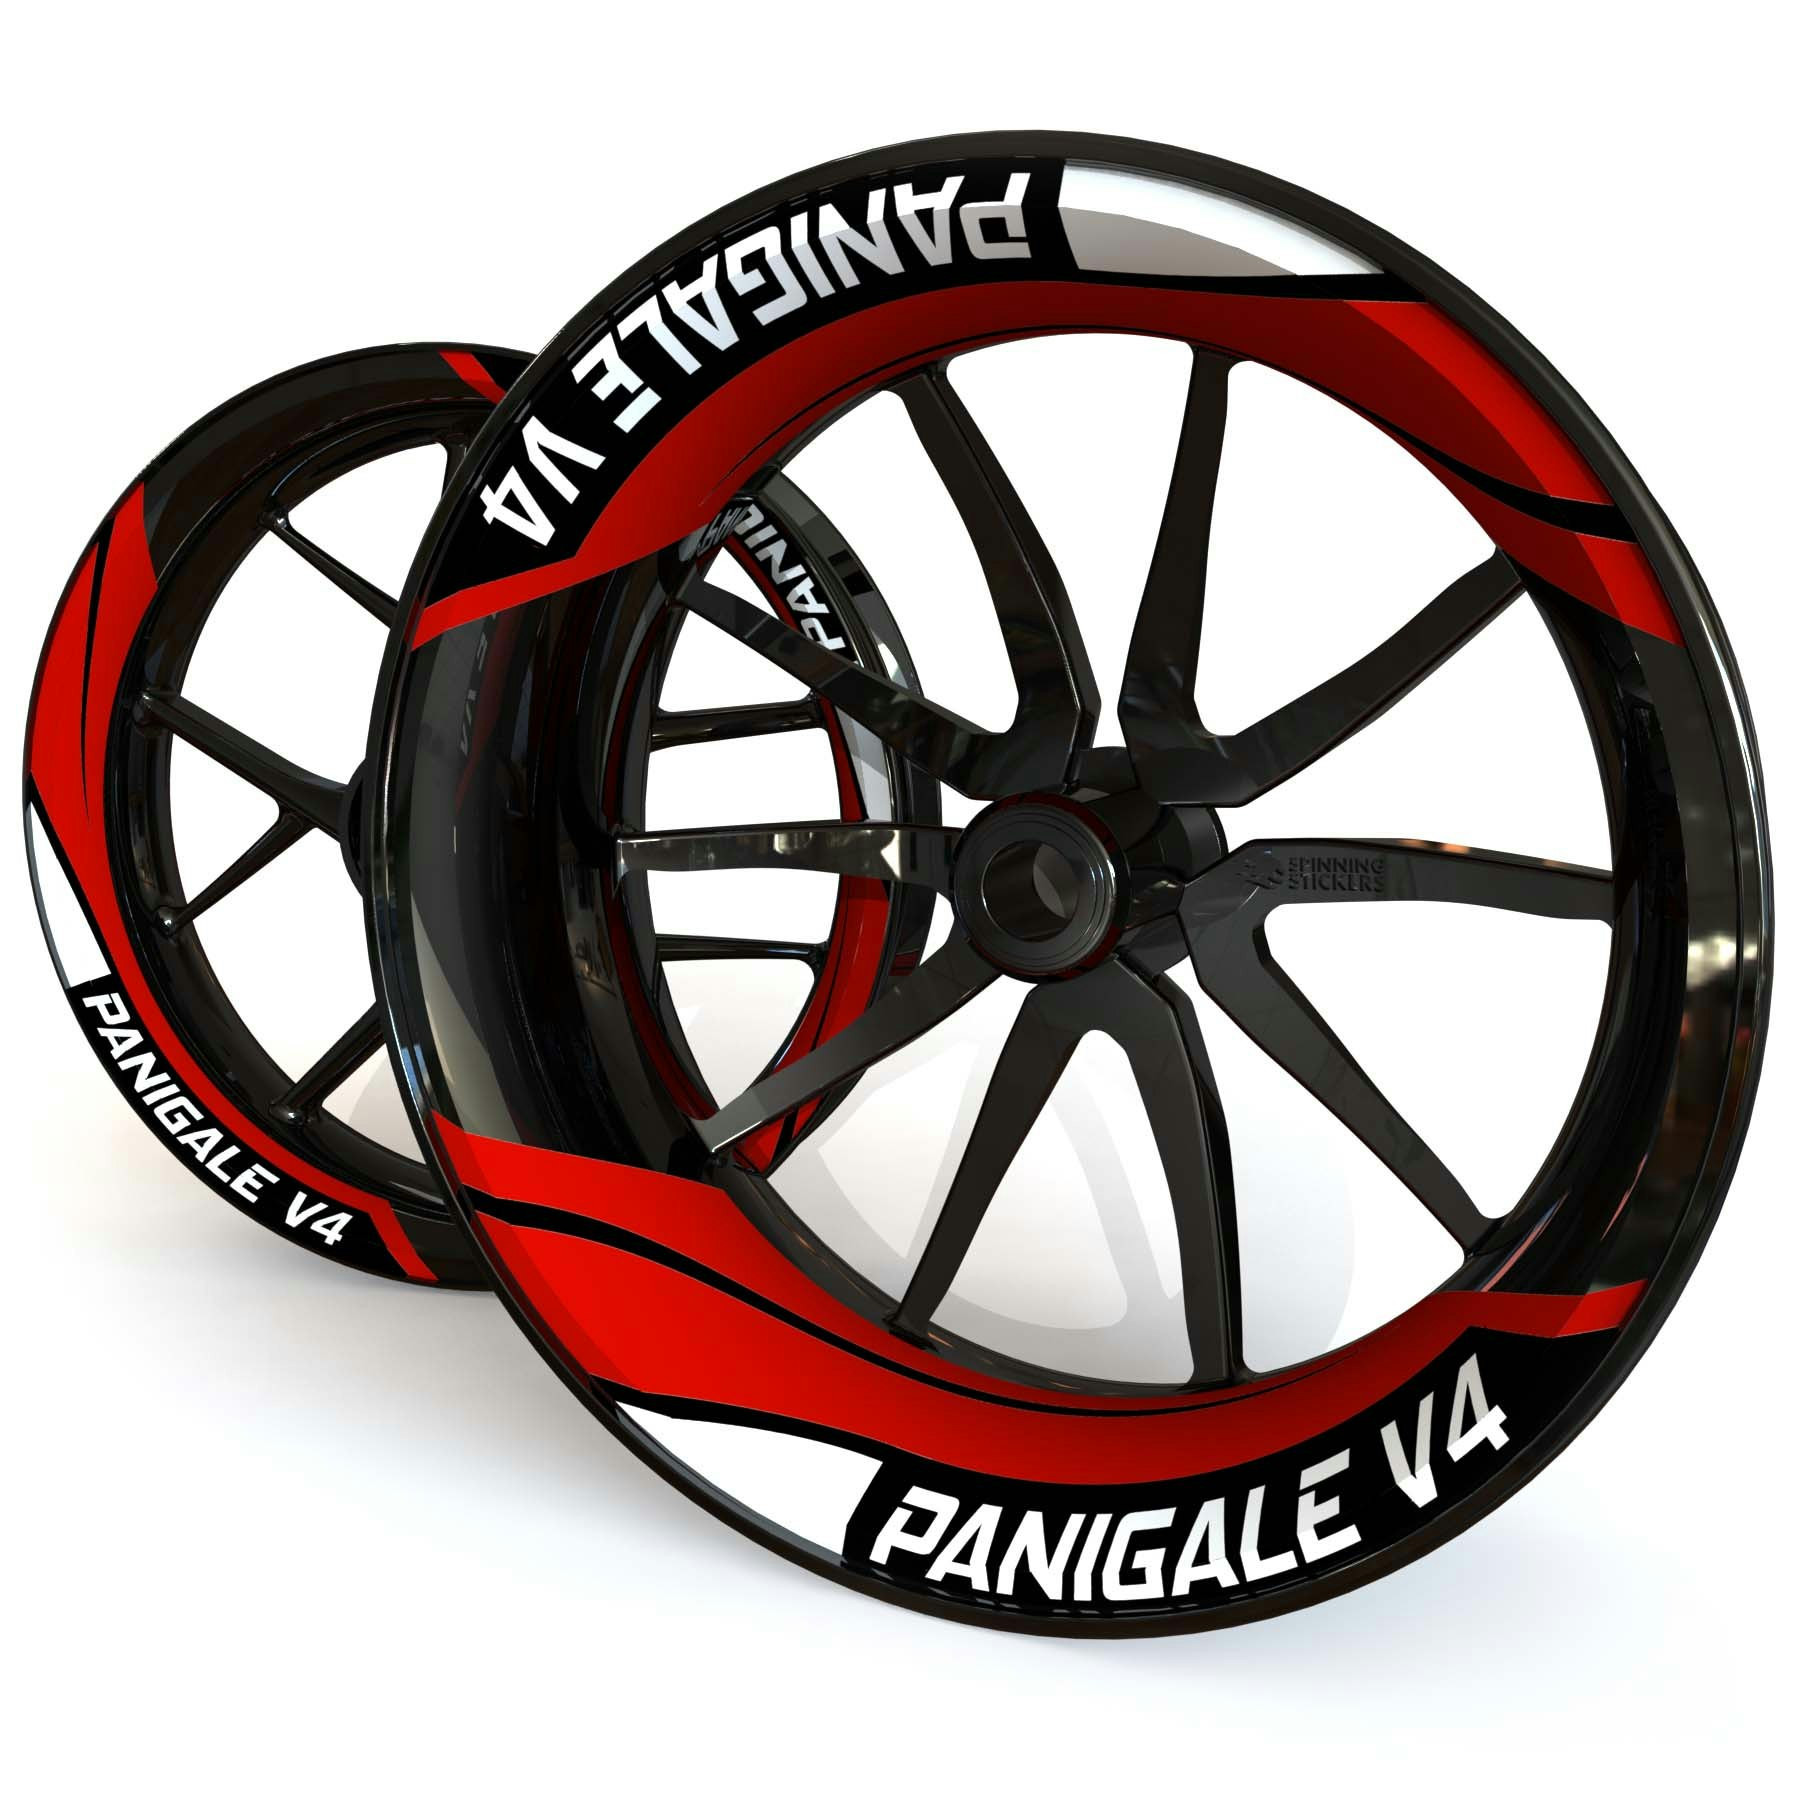 Ducati PANIGALE V4 Wheel Stickers kit - Two Piece Design